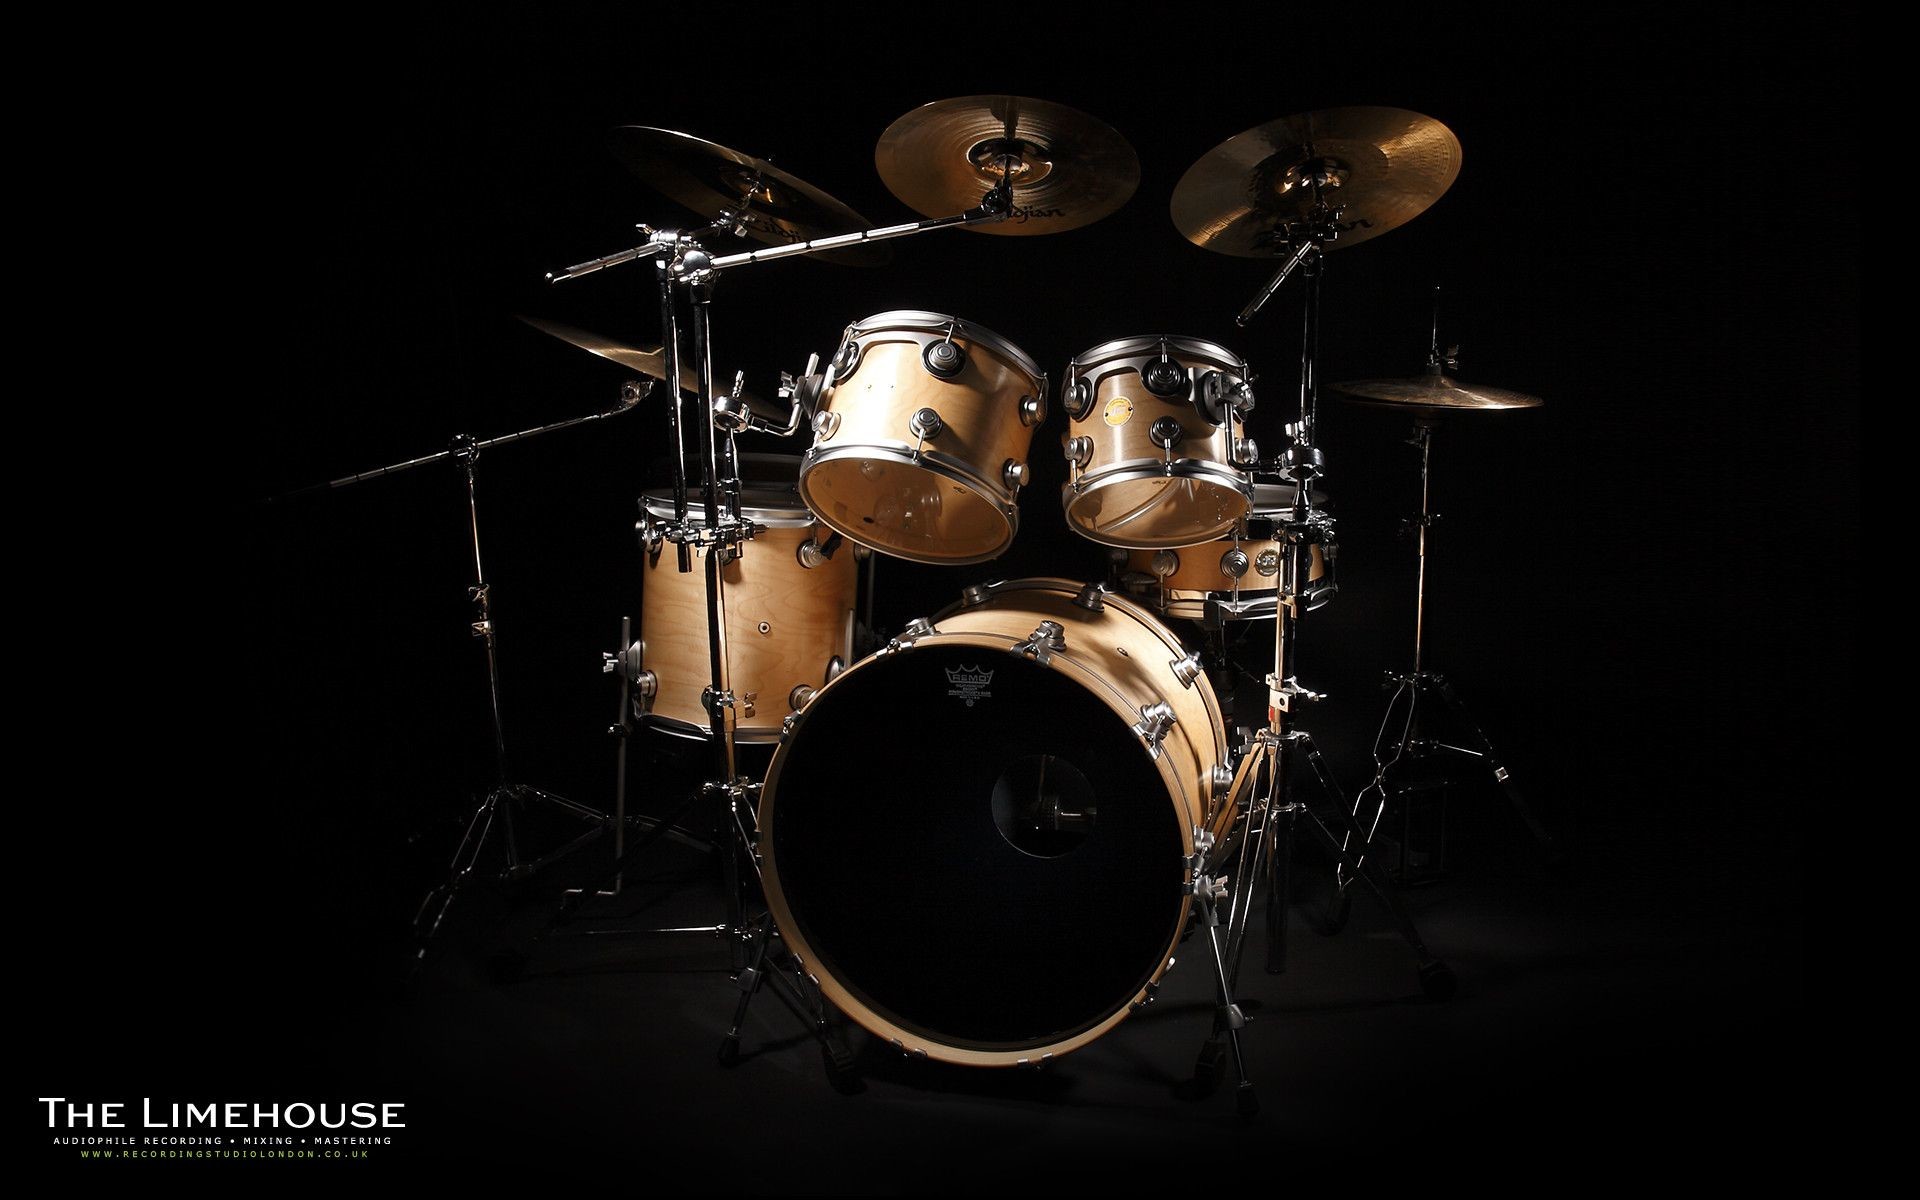 1920x1200 Drum Theme For Windows 8 And Windows 7